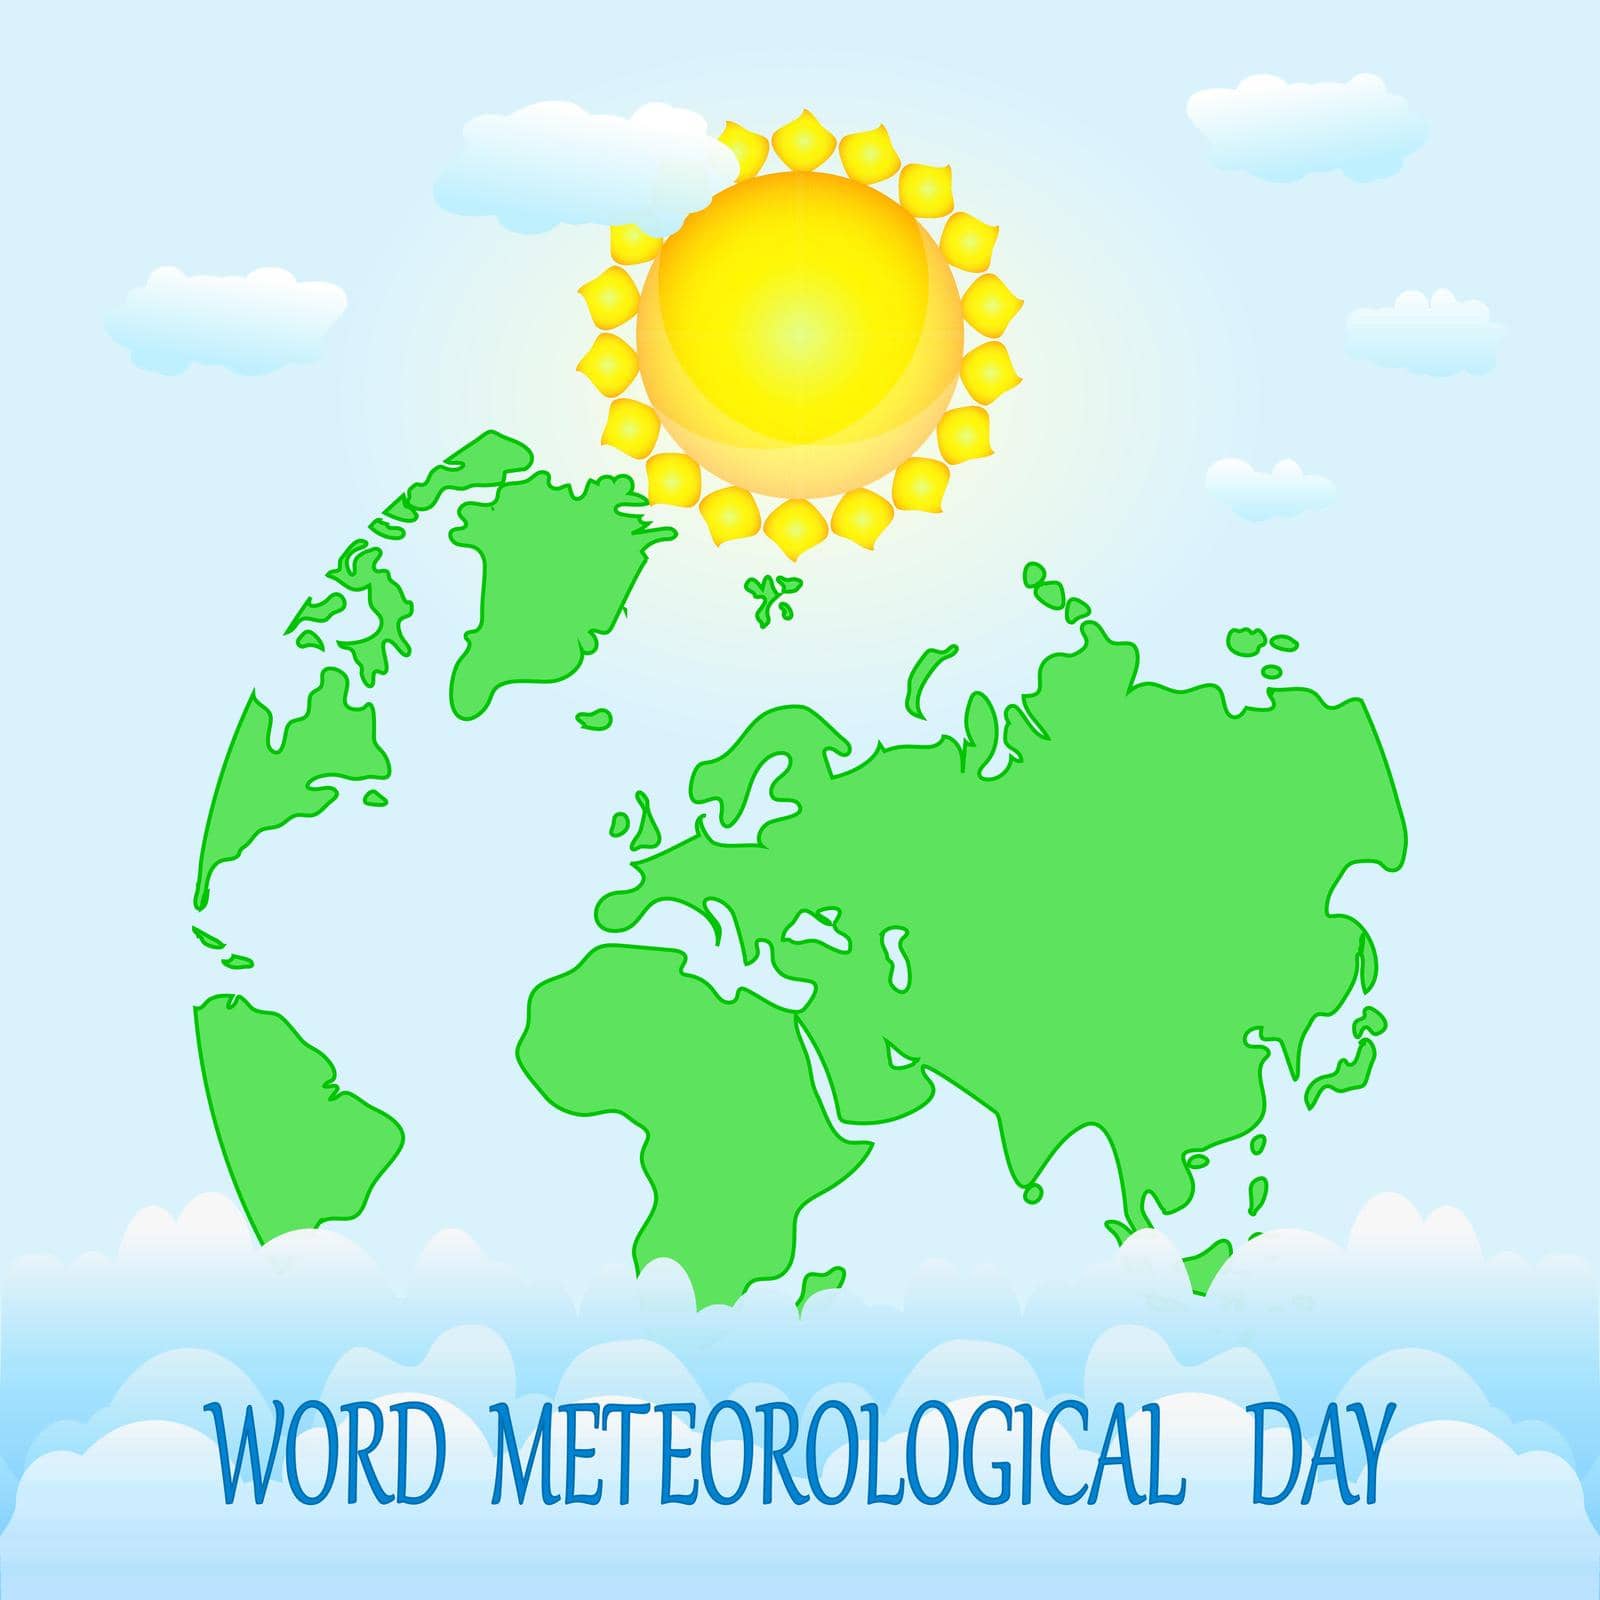 World meteorological day. Greeting card with earth map, sun, clouds and text on blue backdrop. by KajaNi